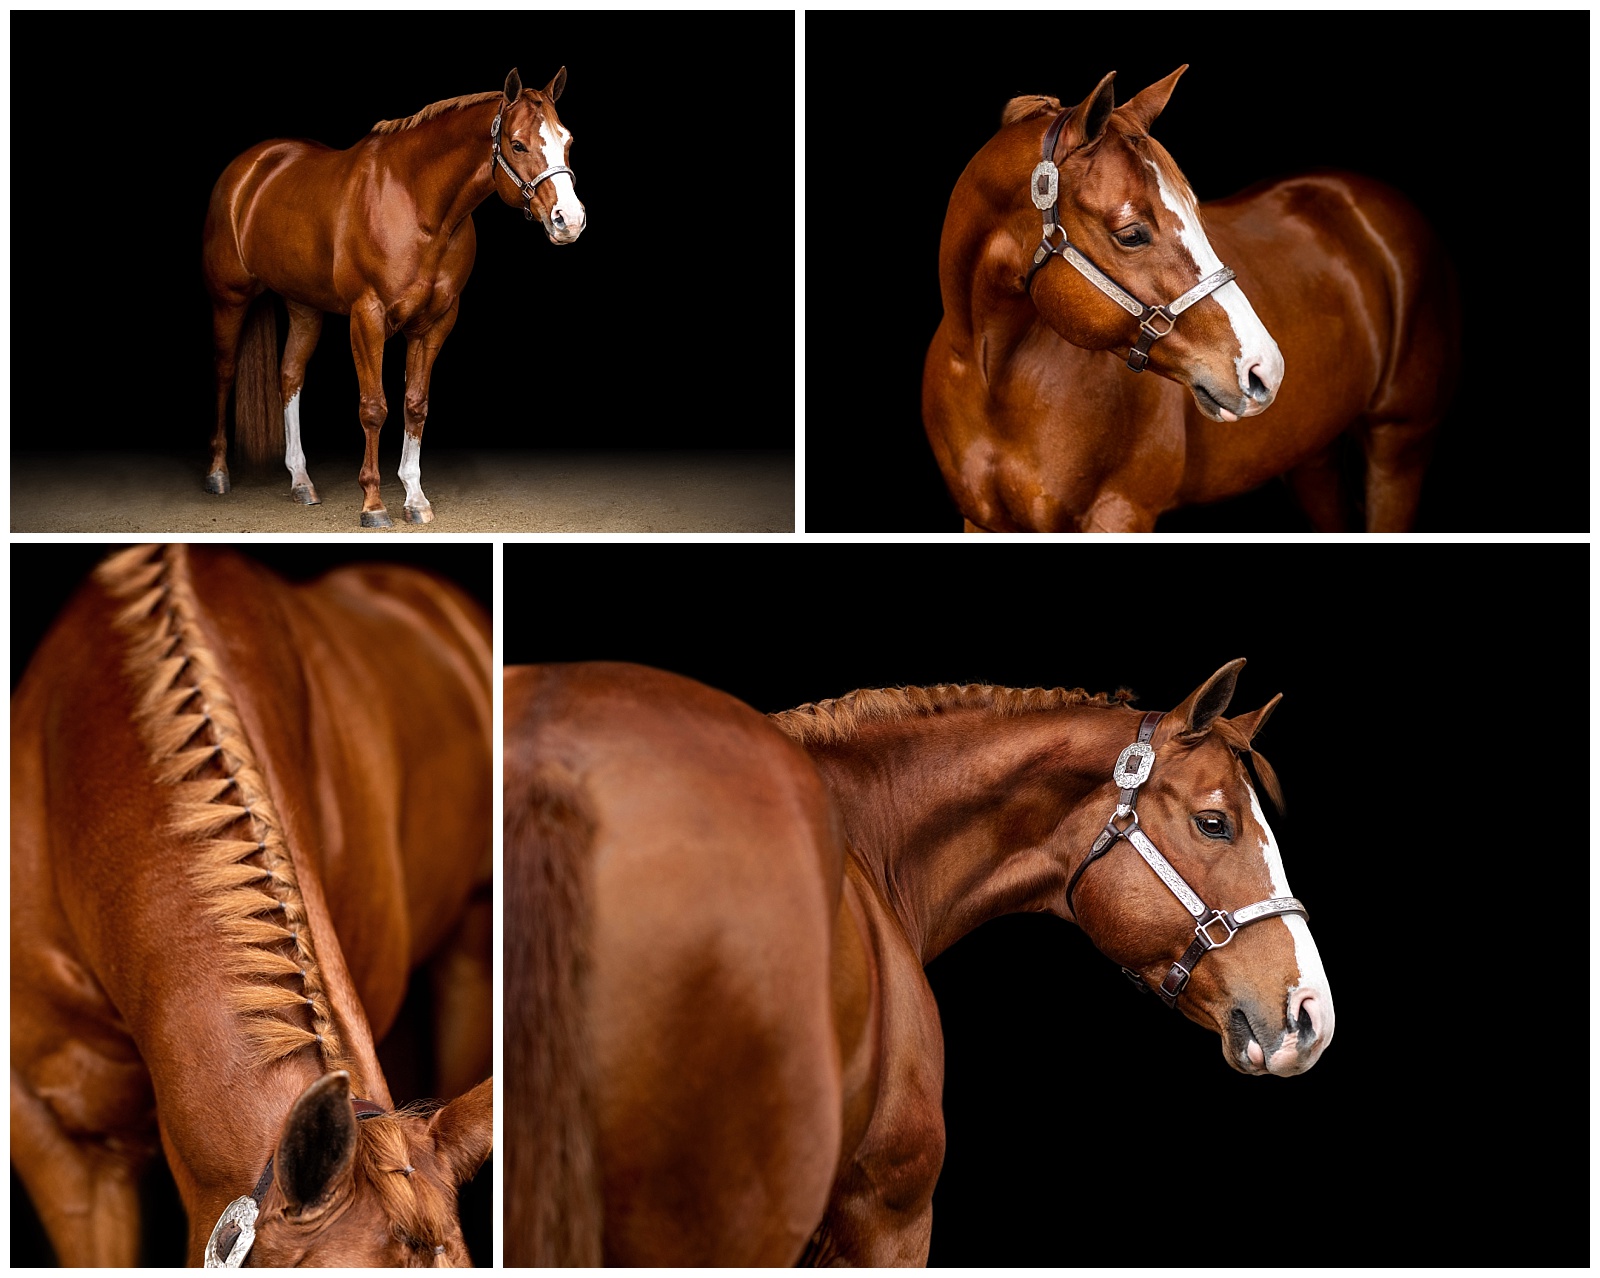 Fine art equine photos in Jacksonville, FL taken by professional equine photographer.